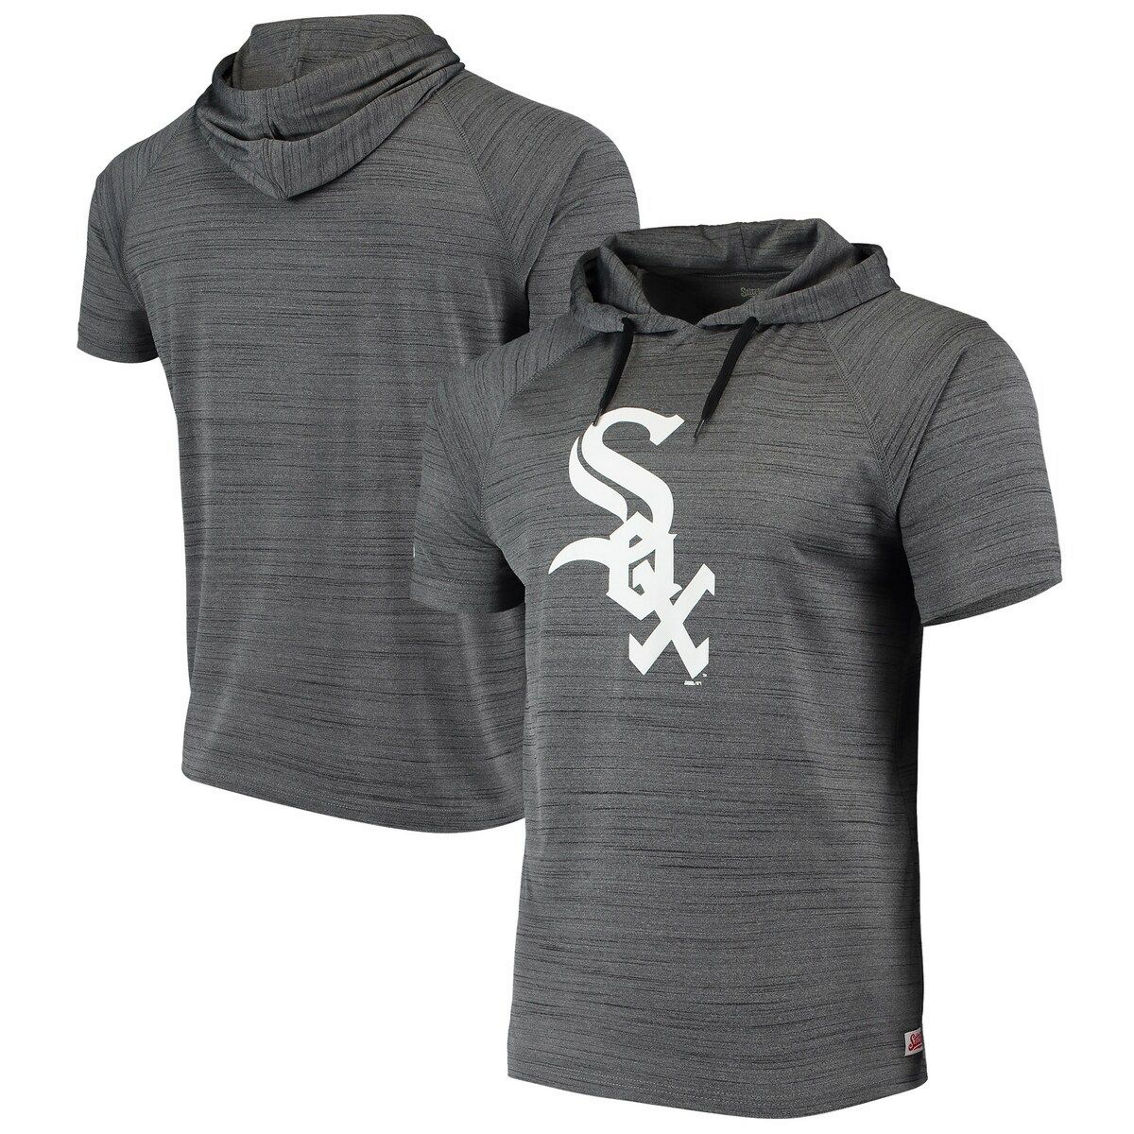 Stitches Men's Heathered Black Chicago White Sox Raglan Short Sleeve Pullover Hoodie - Image 2 of 4